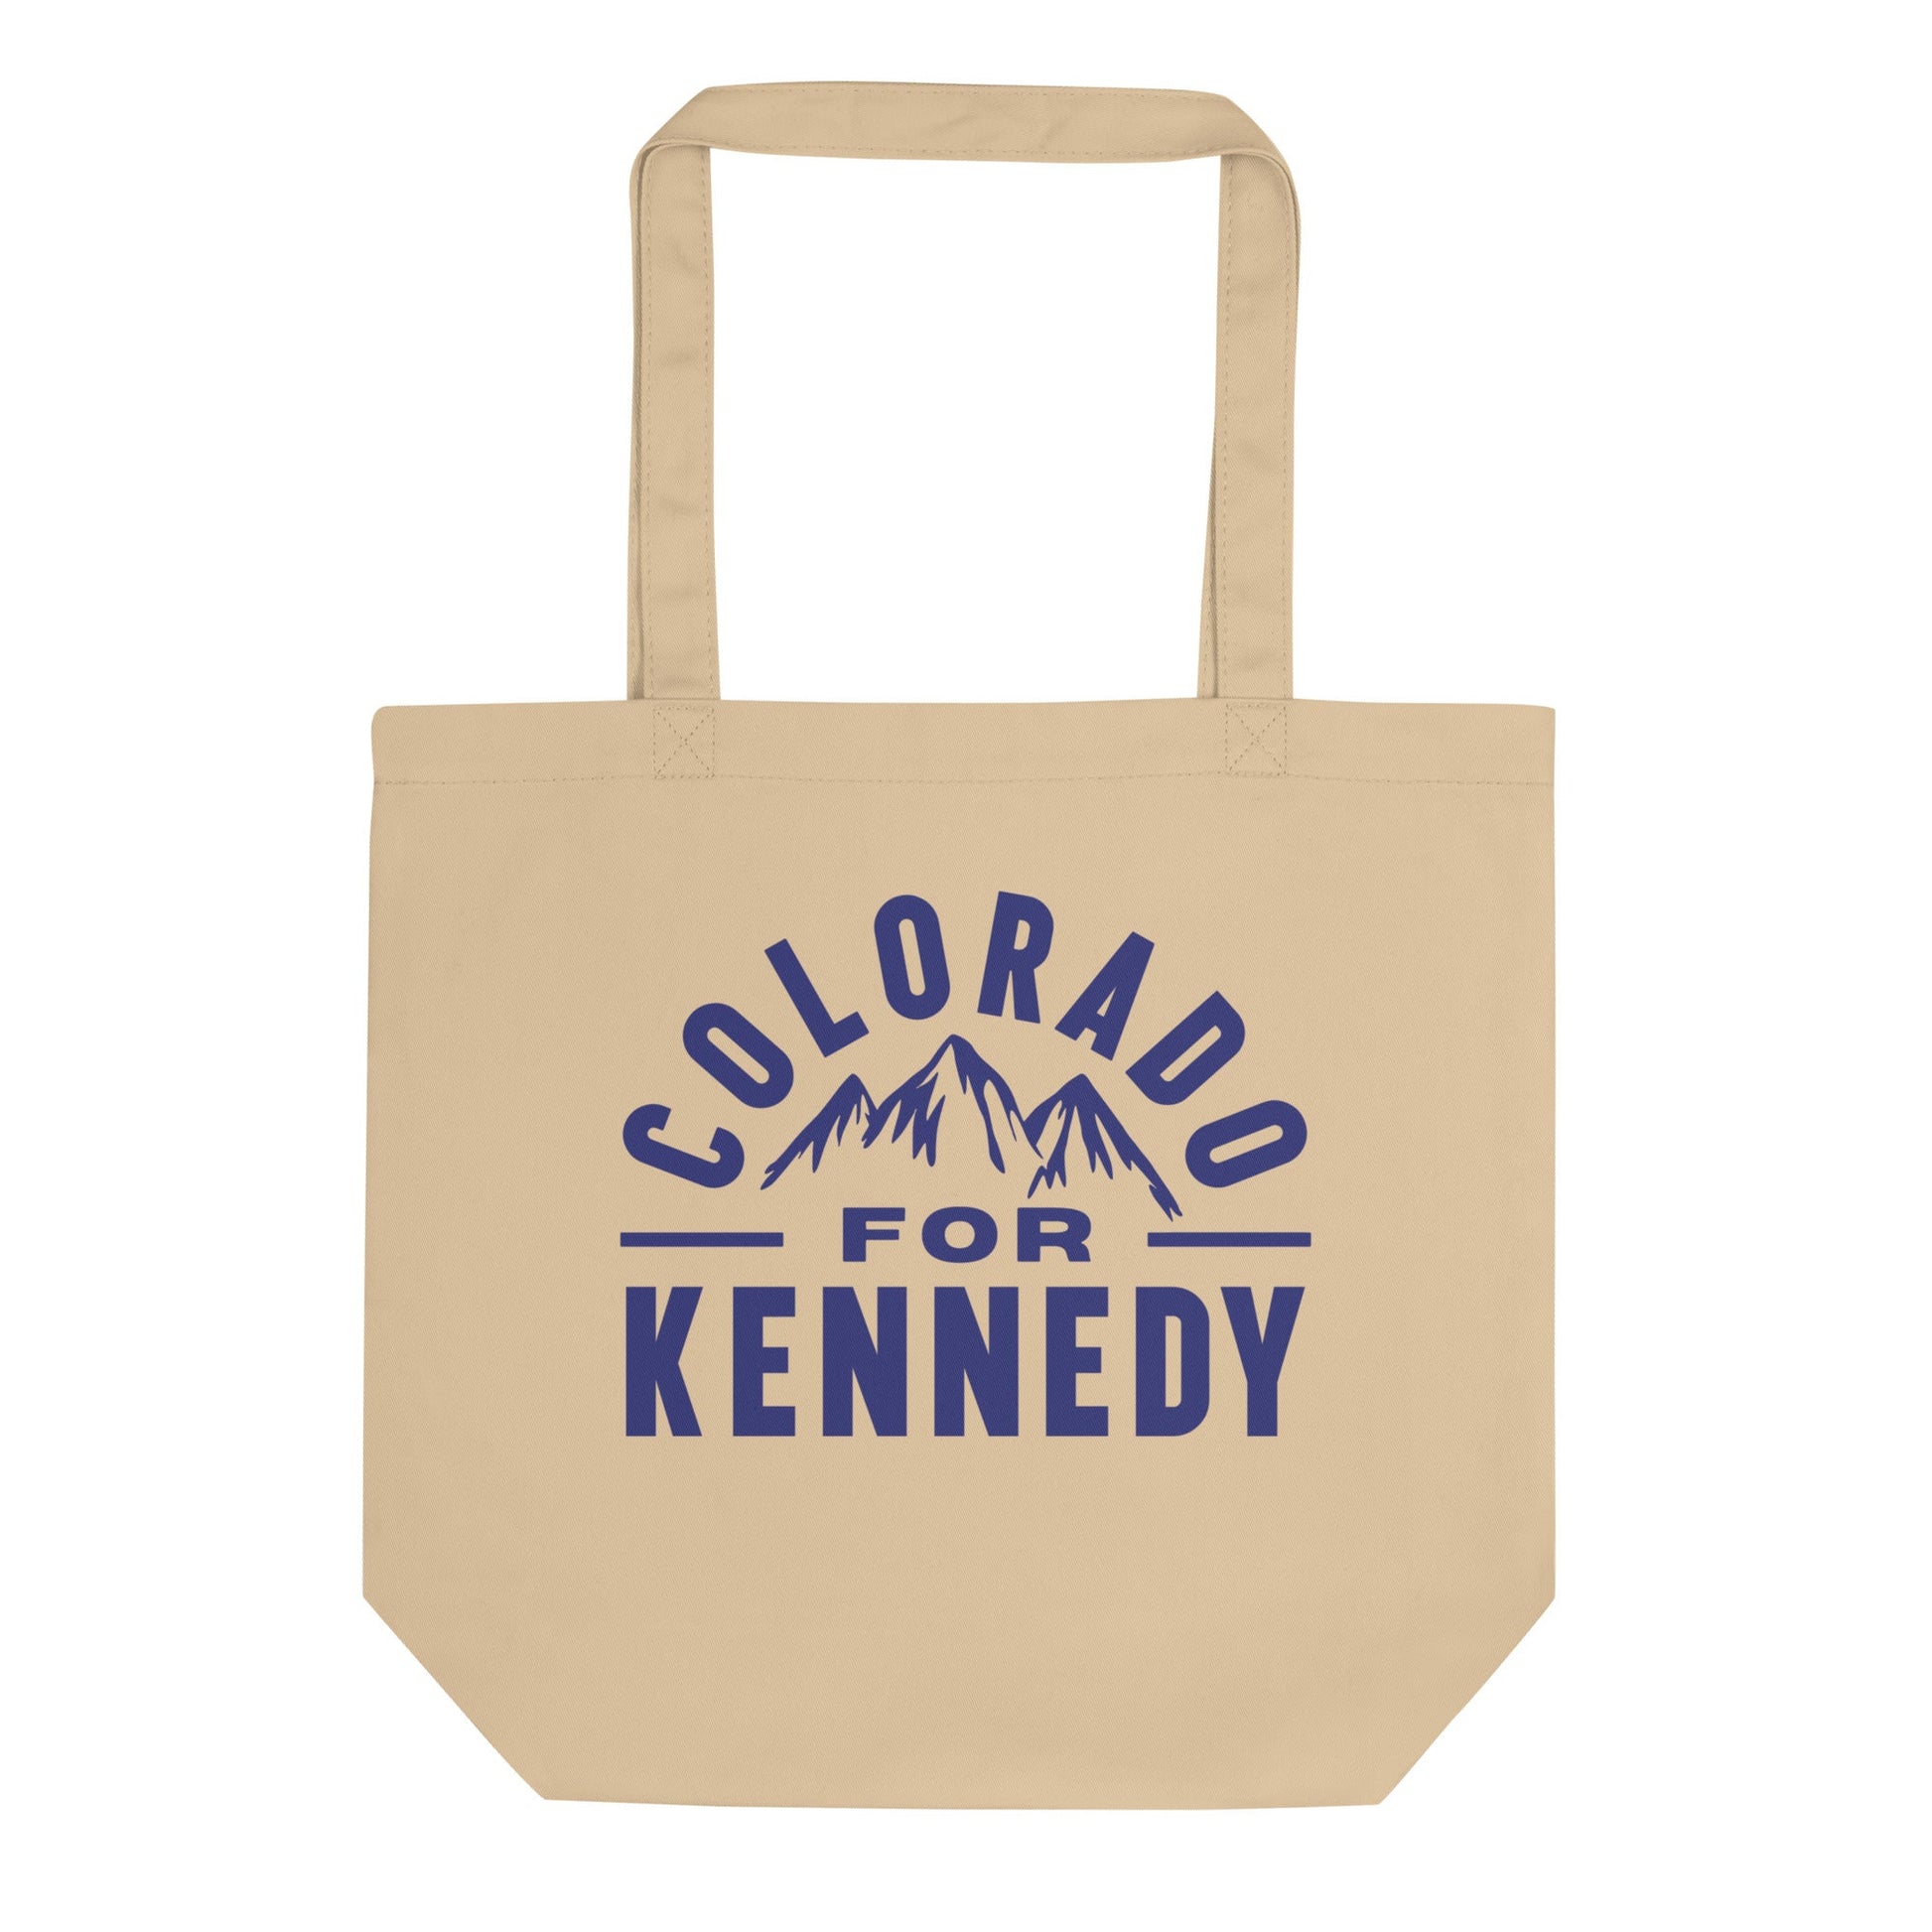 Colorado for Kennedy Tote Bag - TEAM KENNEDY. All rights reserved